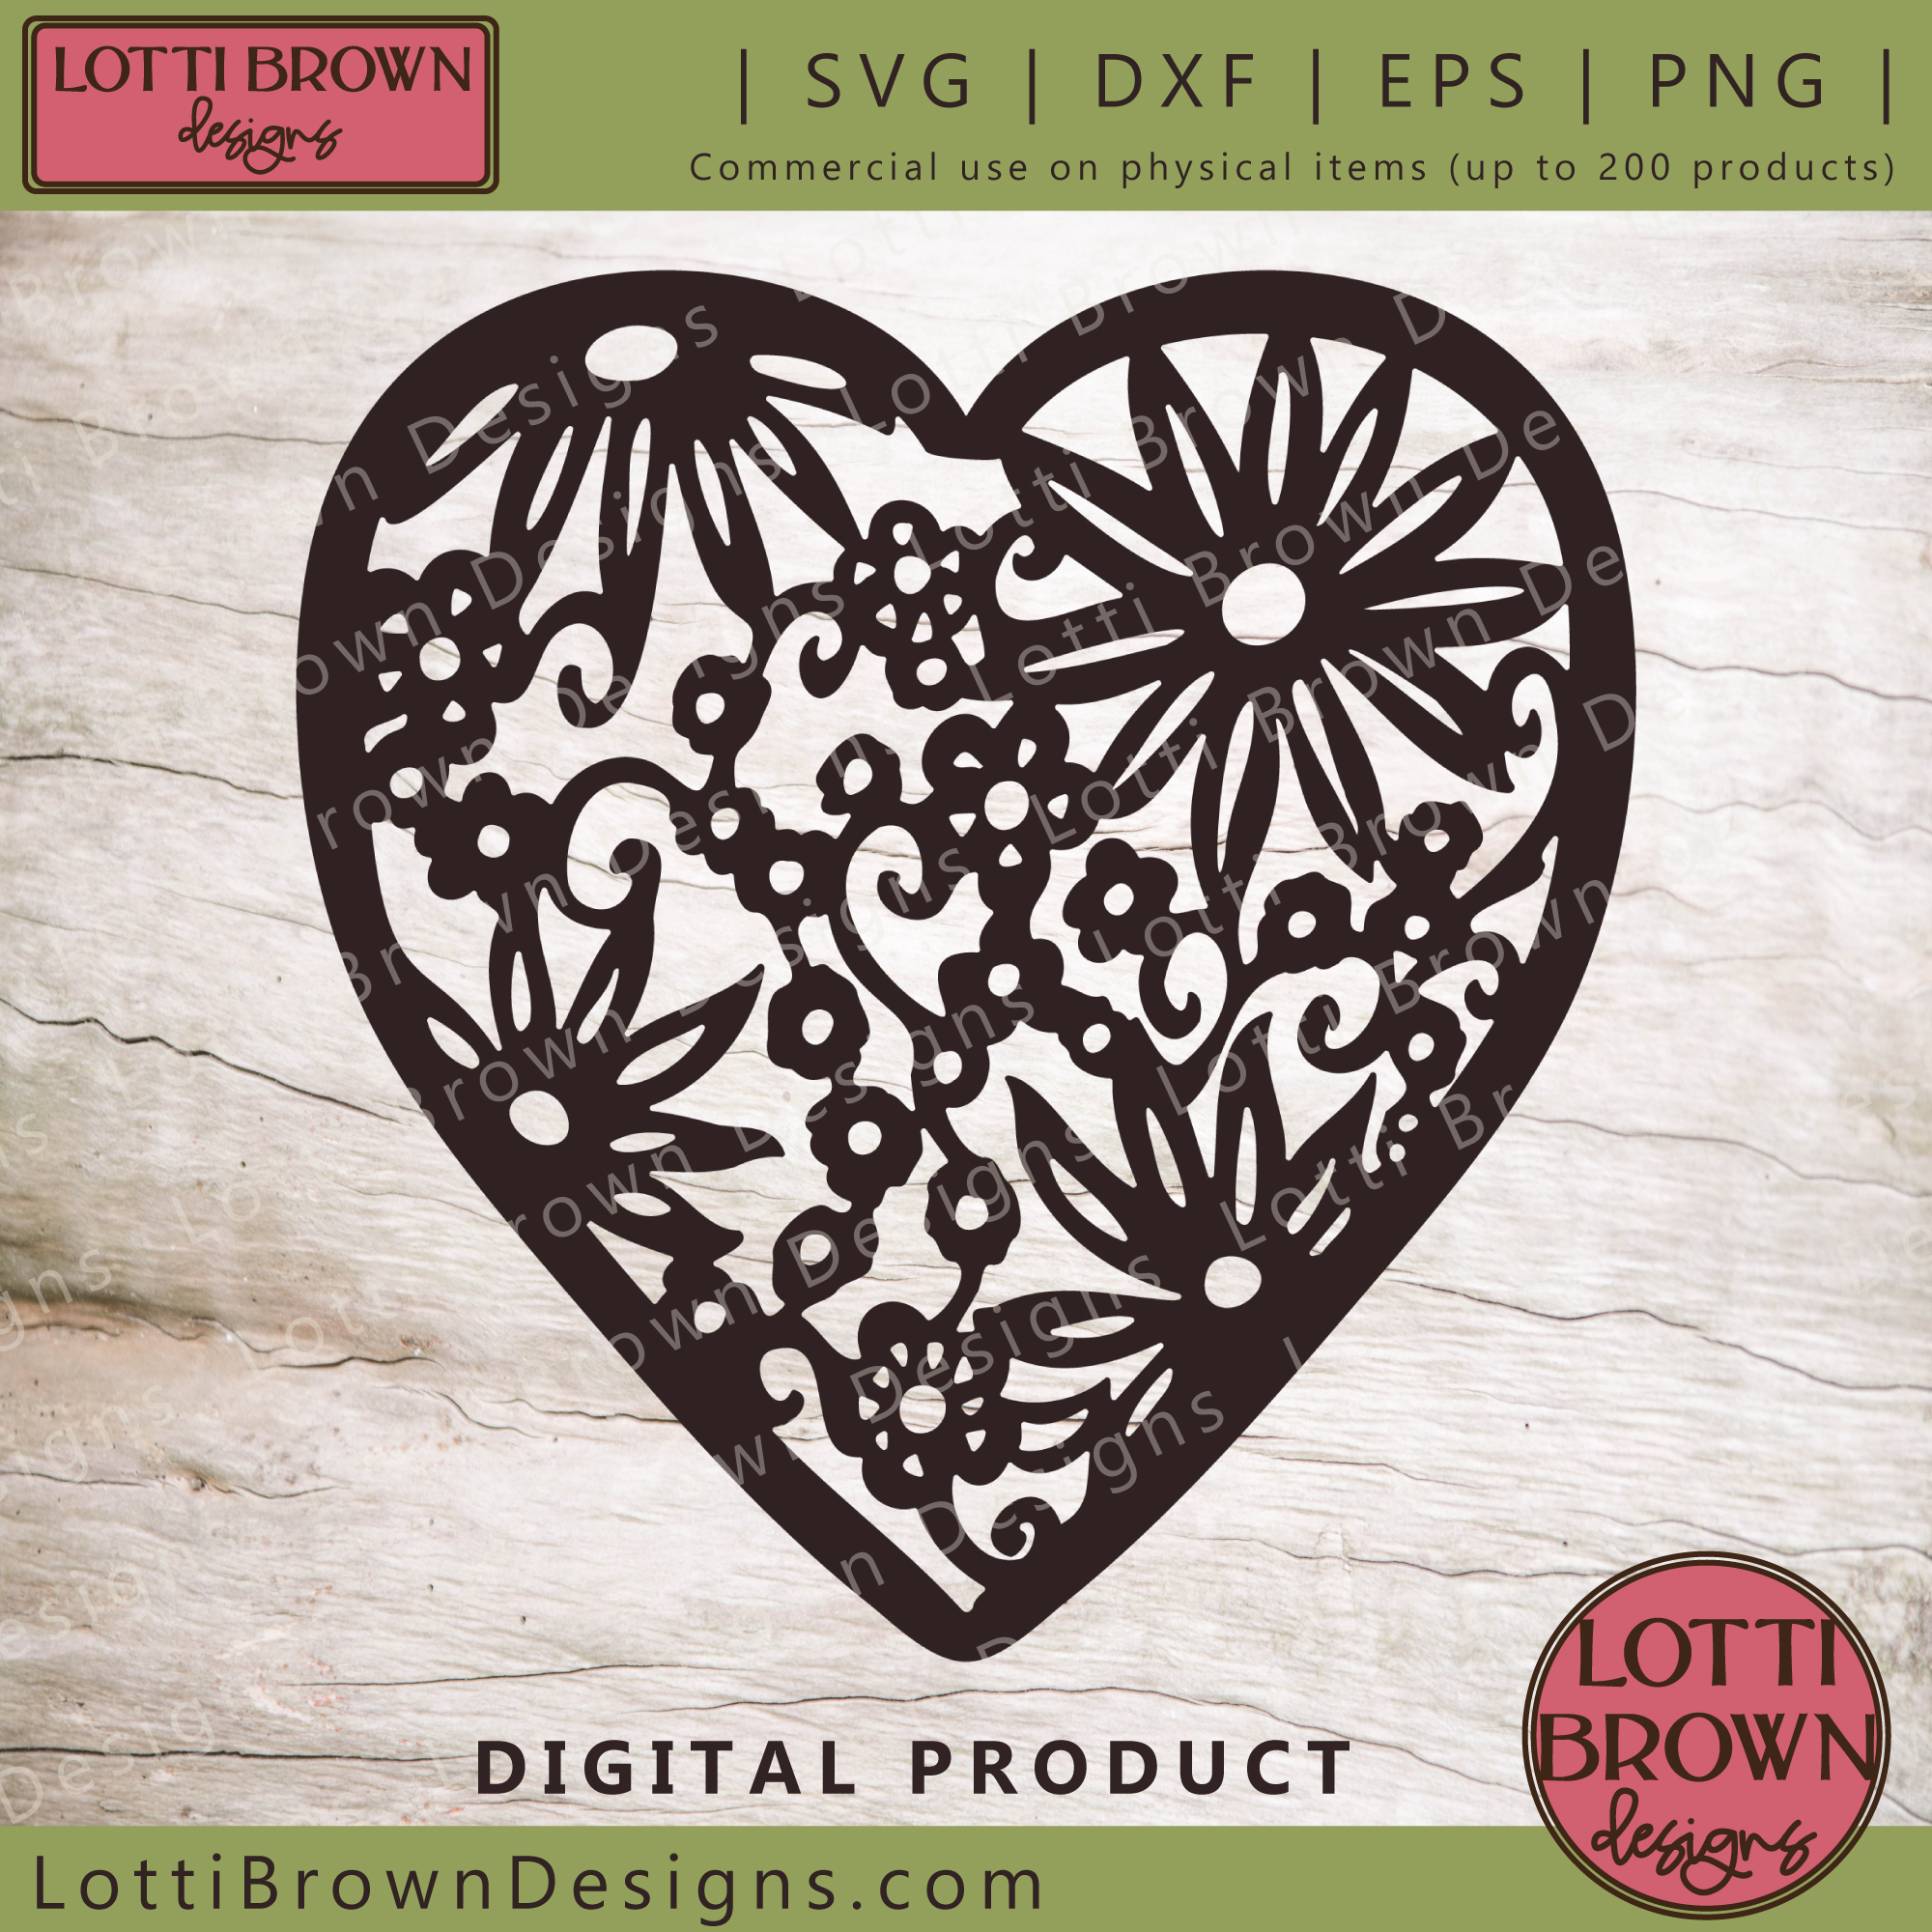 Ditsy floral heart SVG template